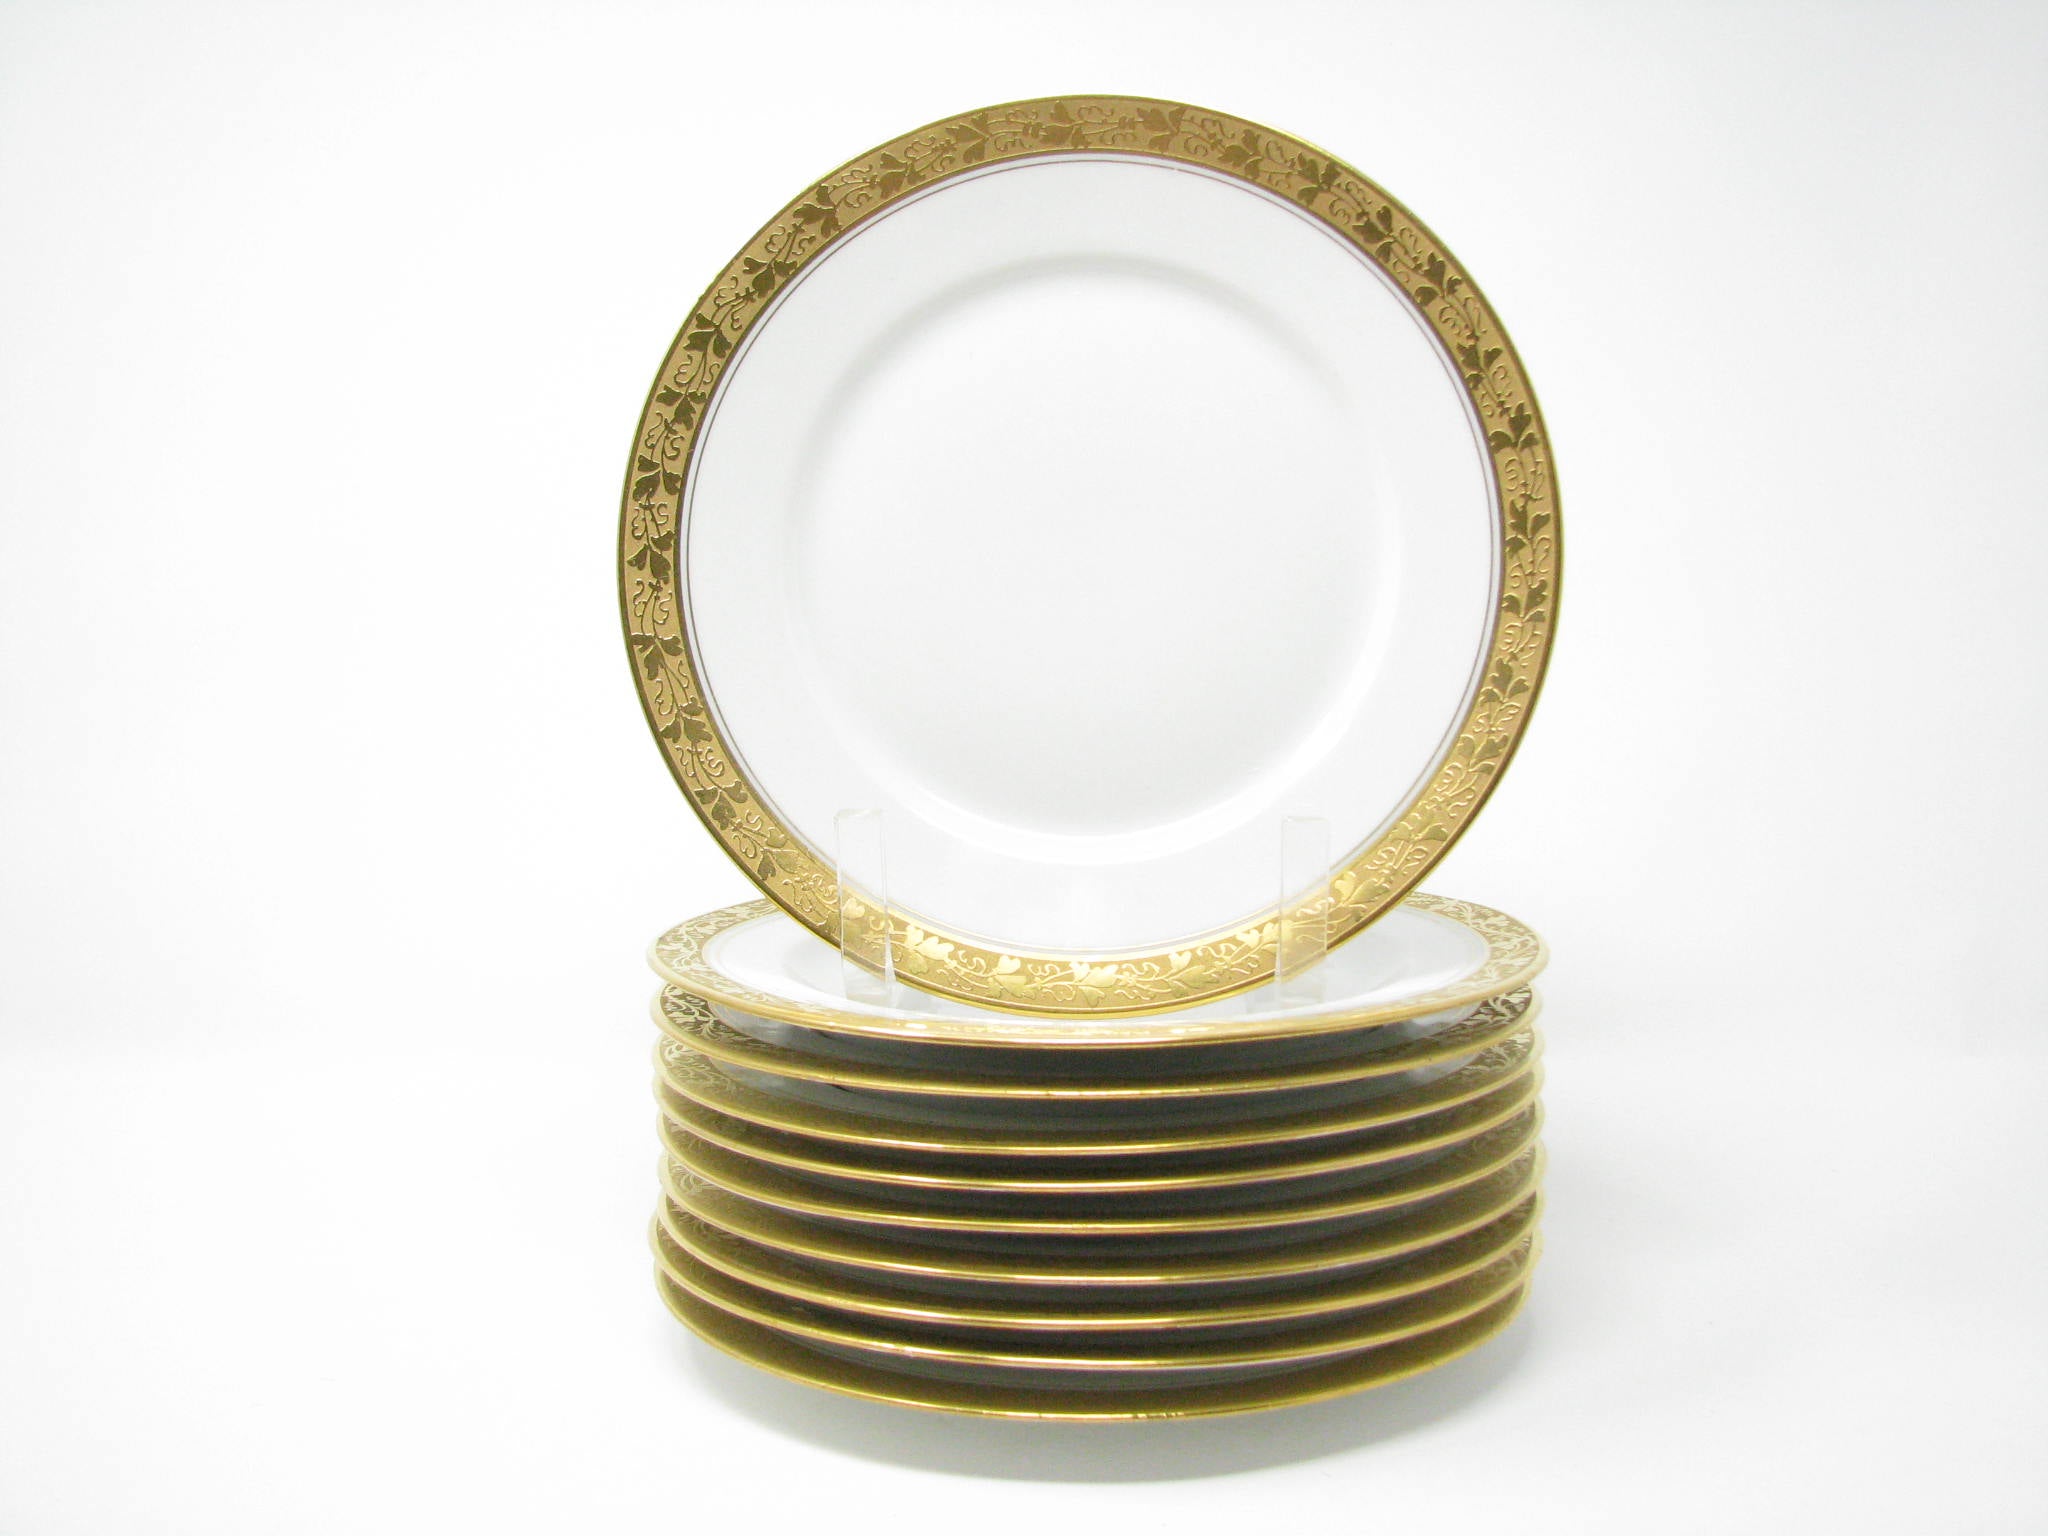 Gold Selb 1920s A.W. – edgebrookhouse Hutschenreuther Steiner Salad Plate 22K Encrusted